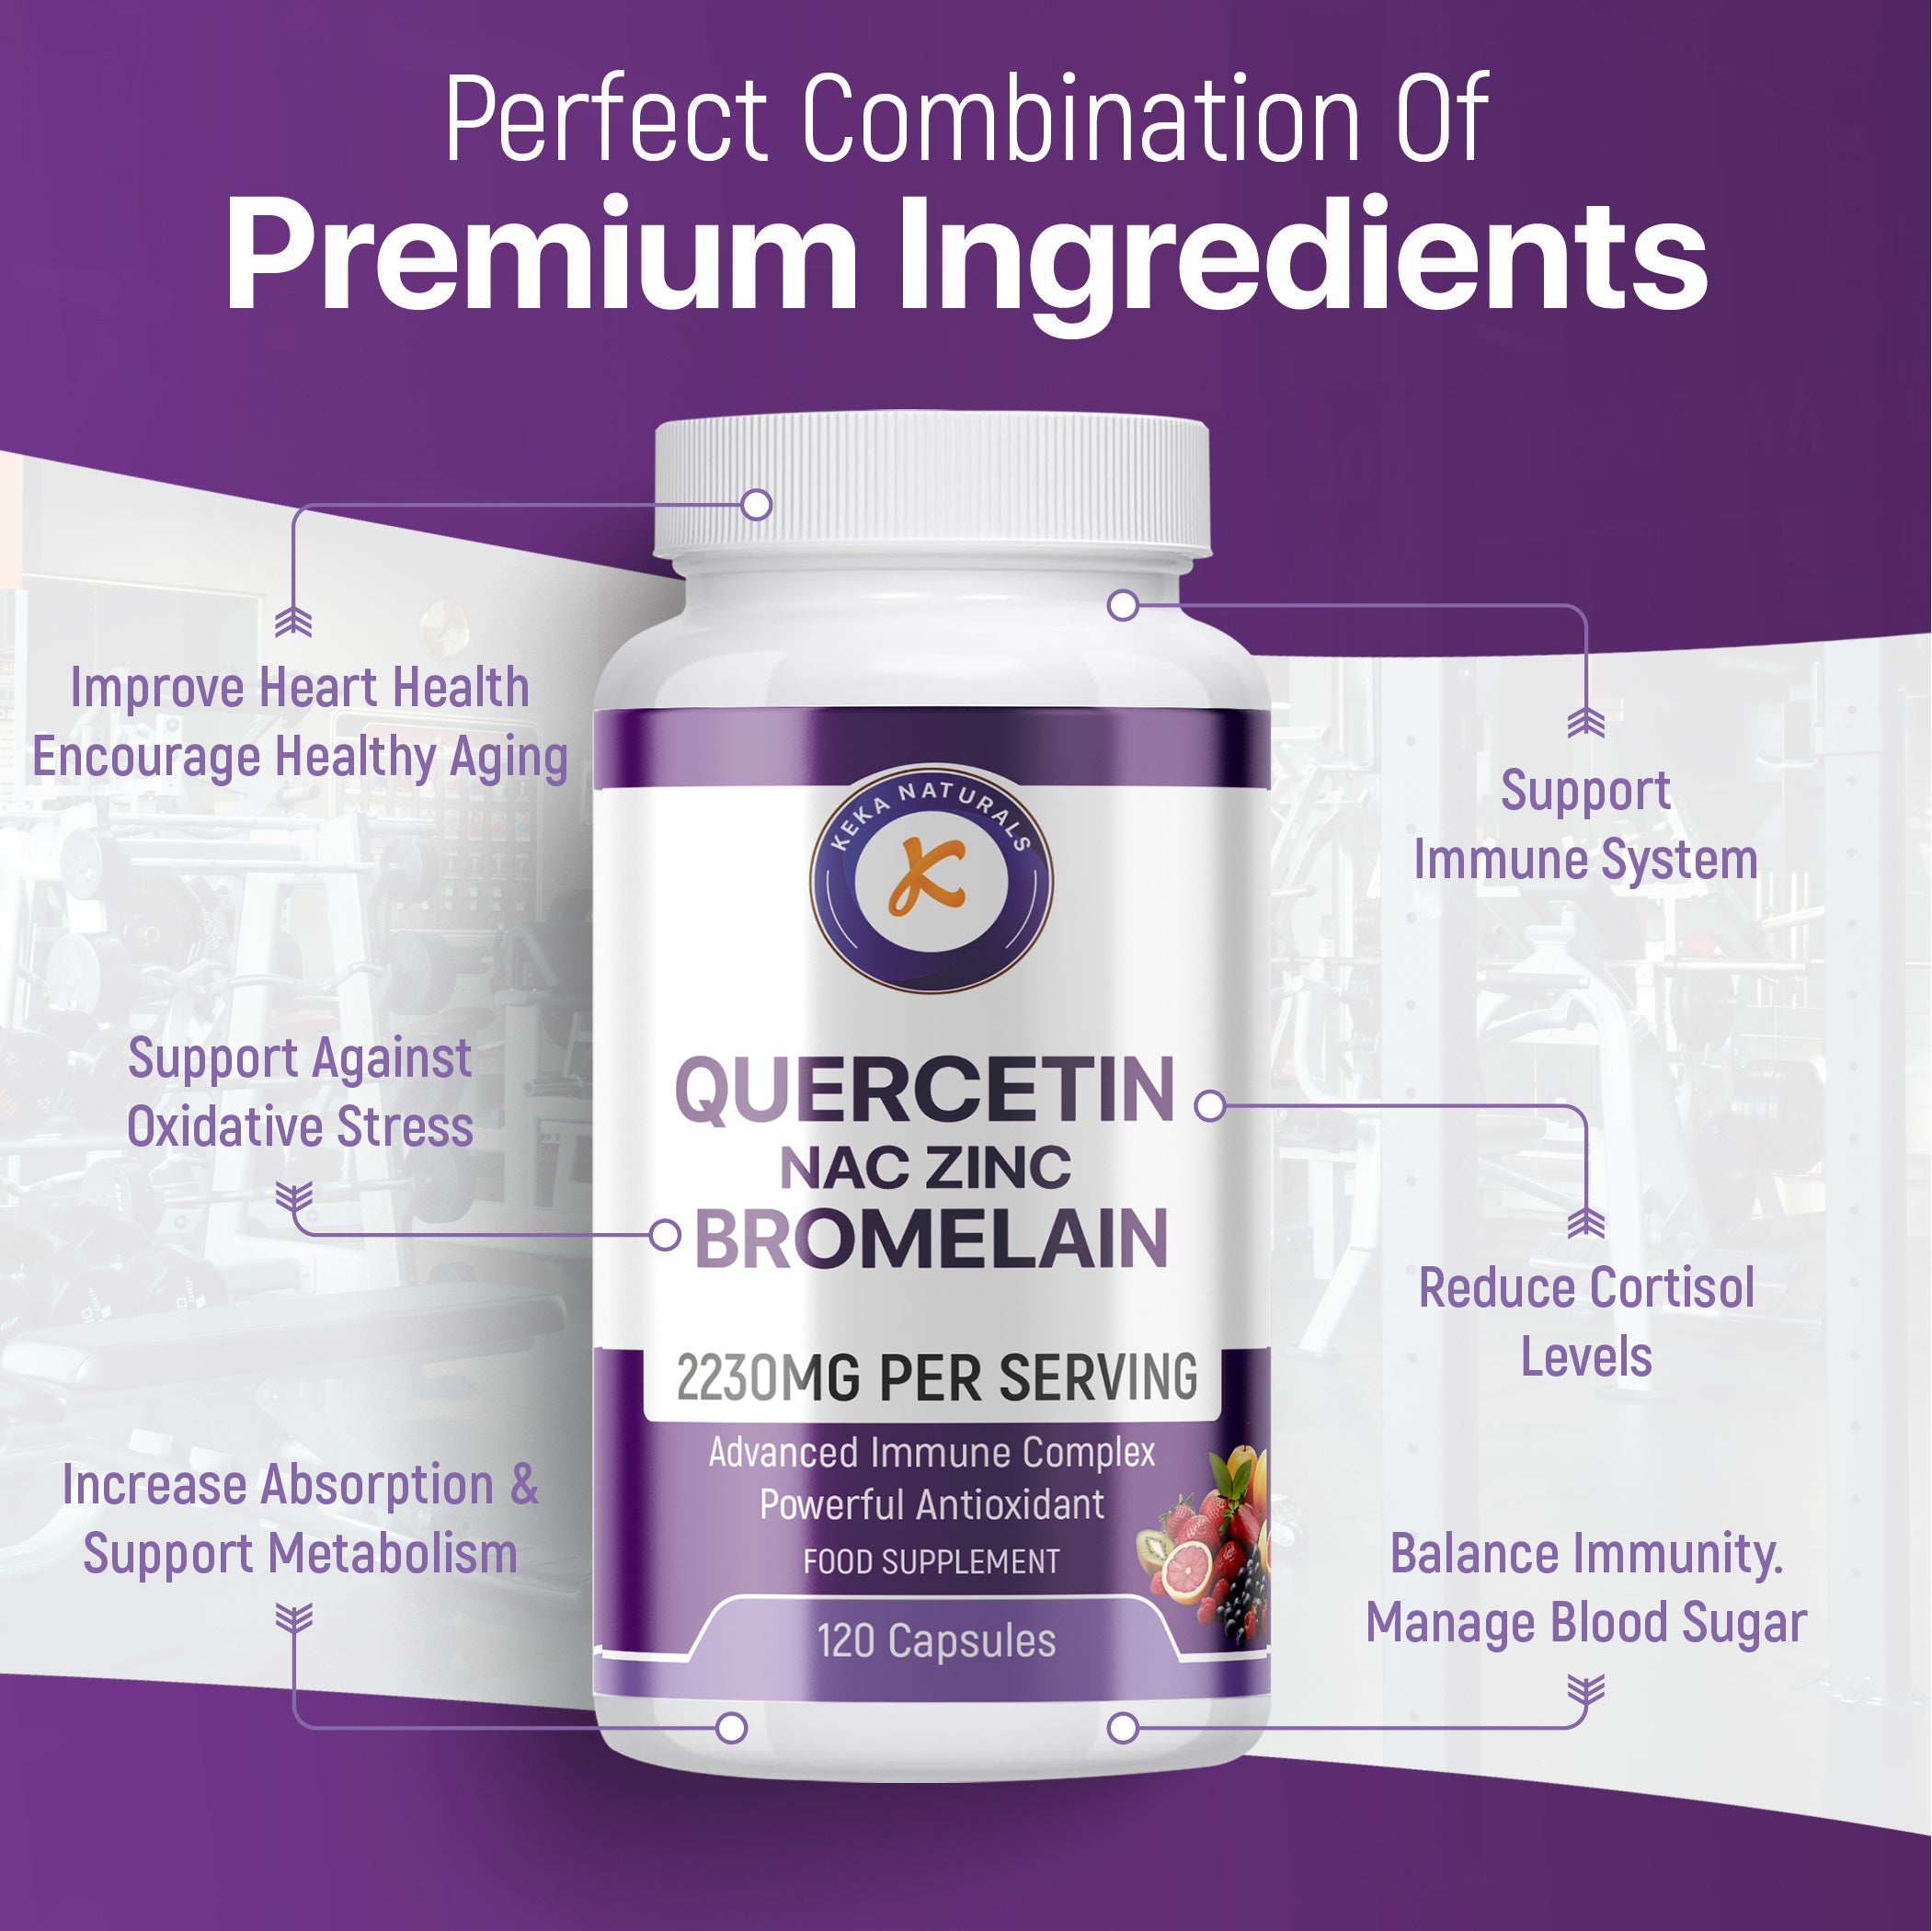 Quercetin Complex 2230mg nac zinc bromelain premium ingredienta to support healthy ageing and immune system